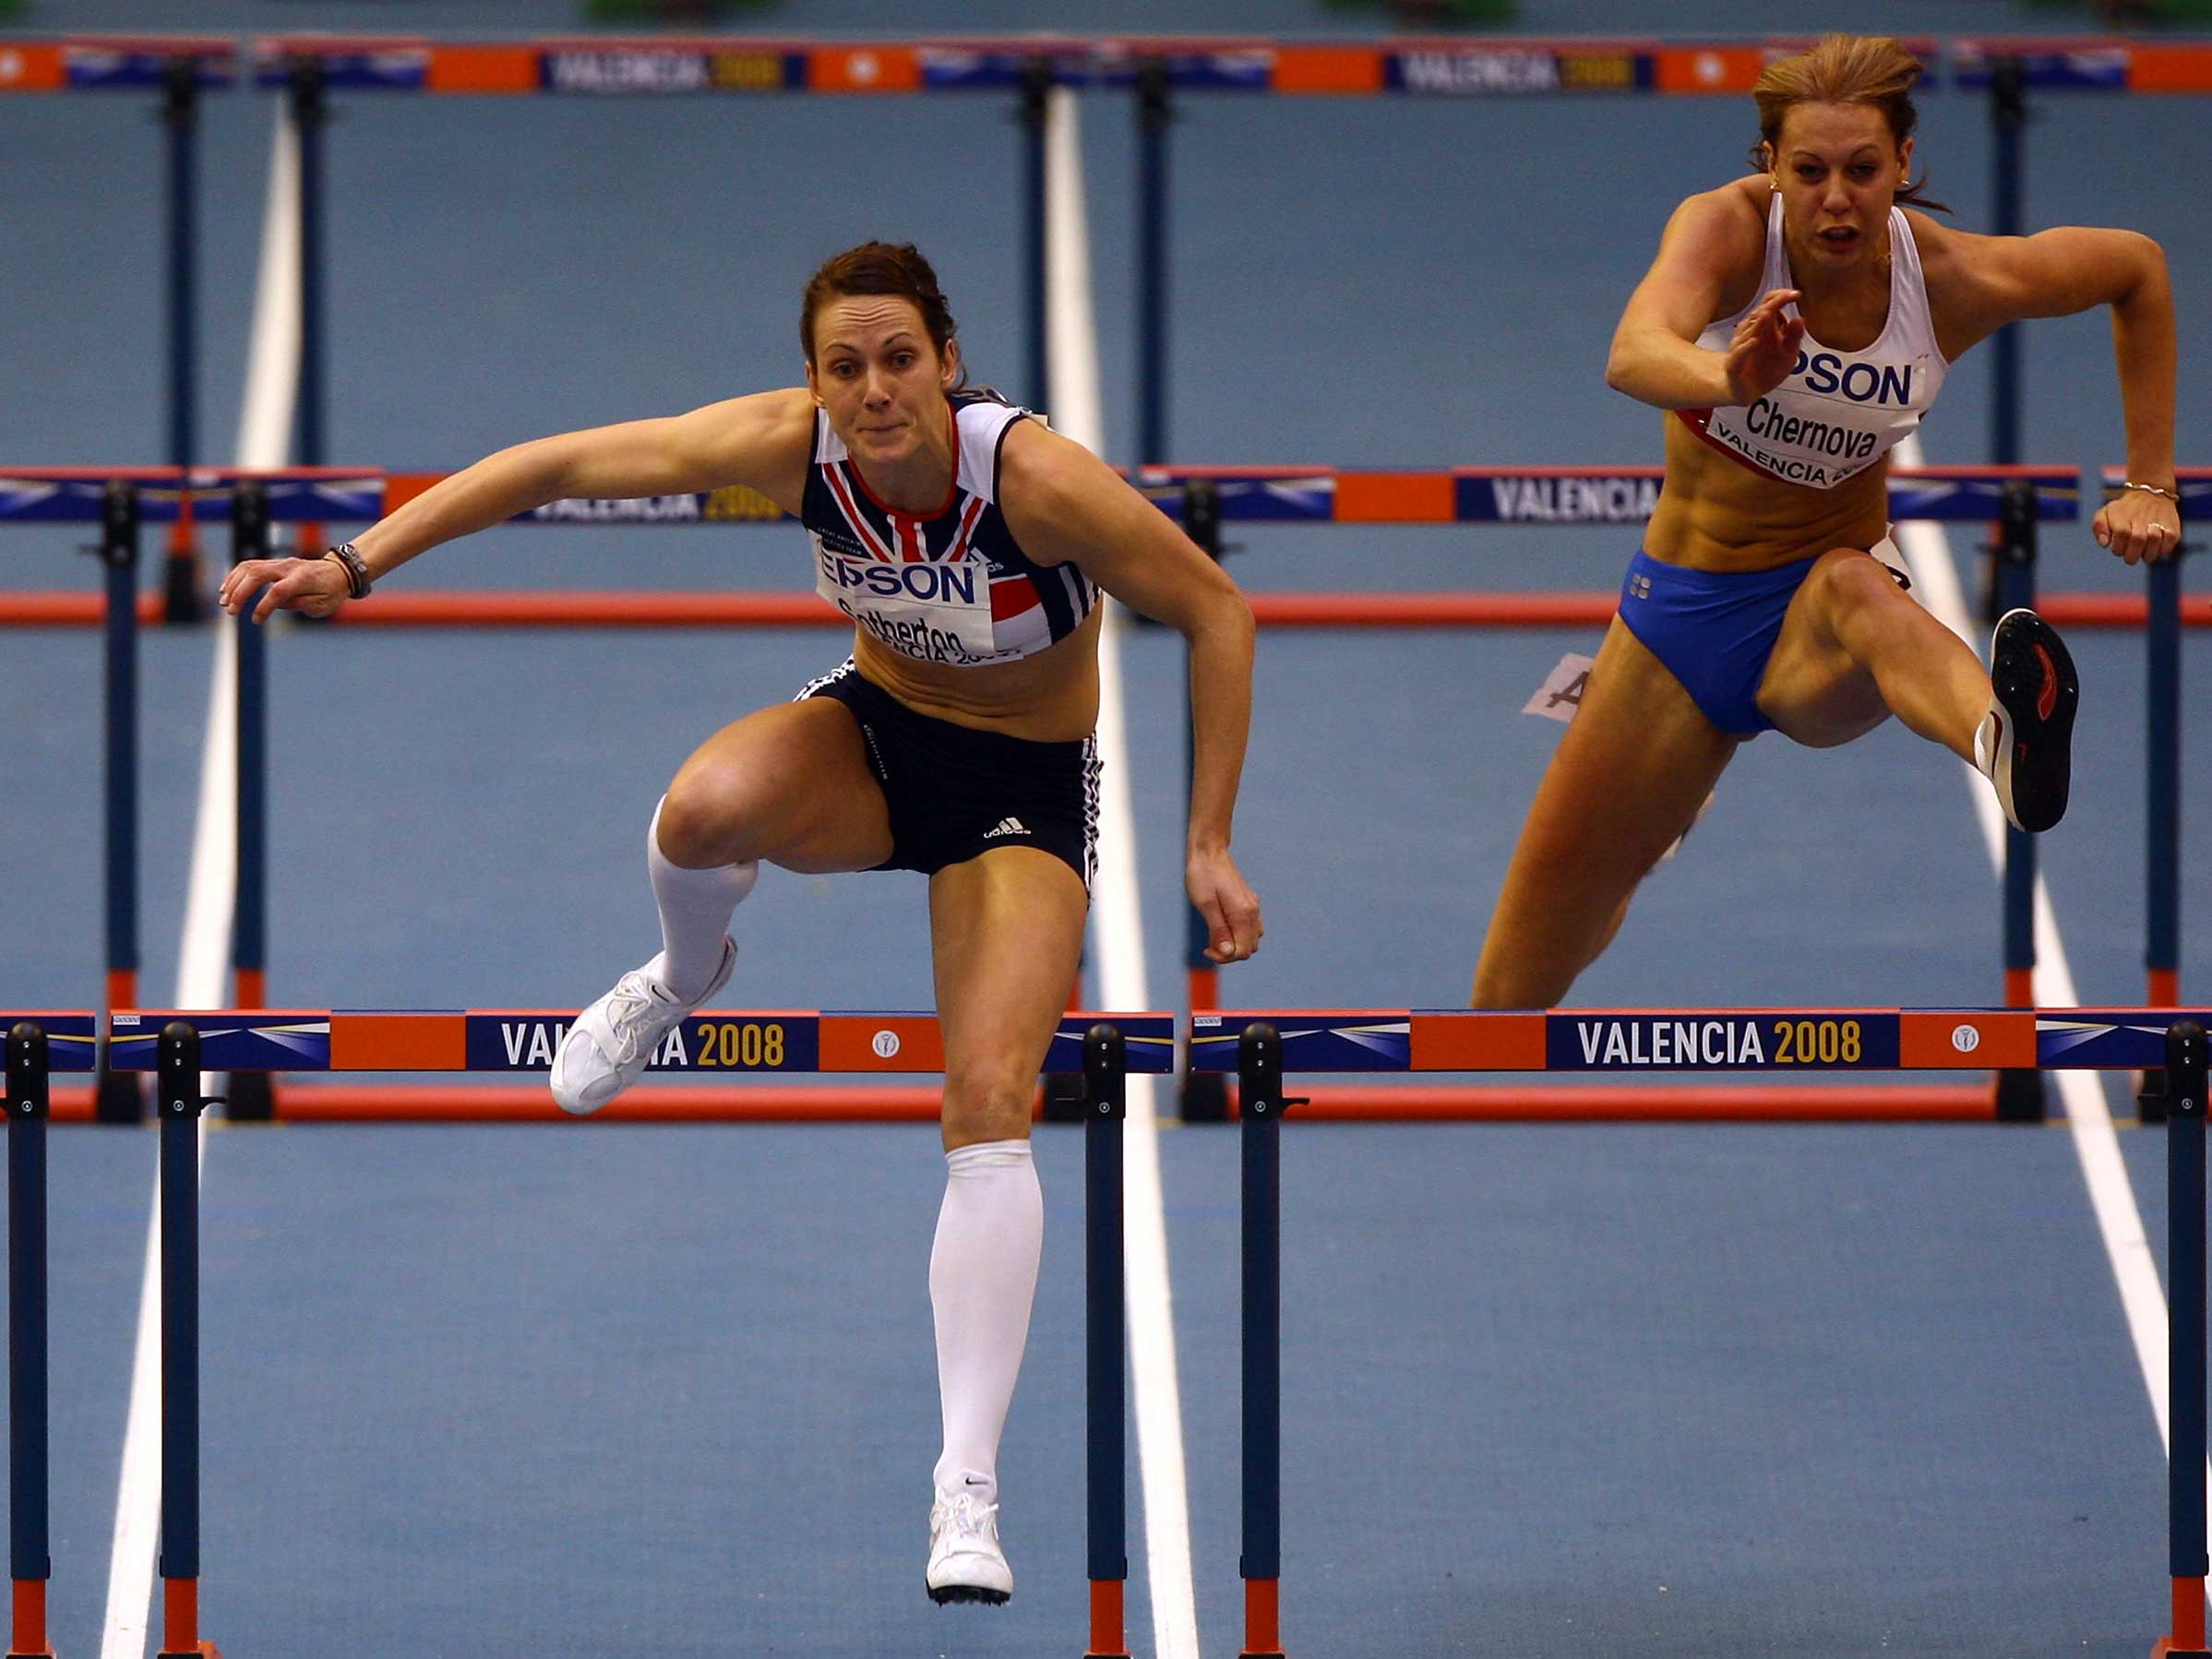 Kelly Sotherton (left) races against the Russian Tatyana Chernova, who was later banned